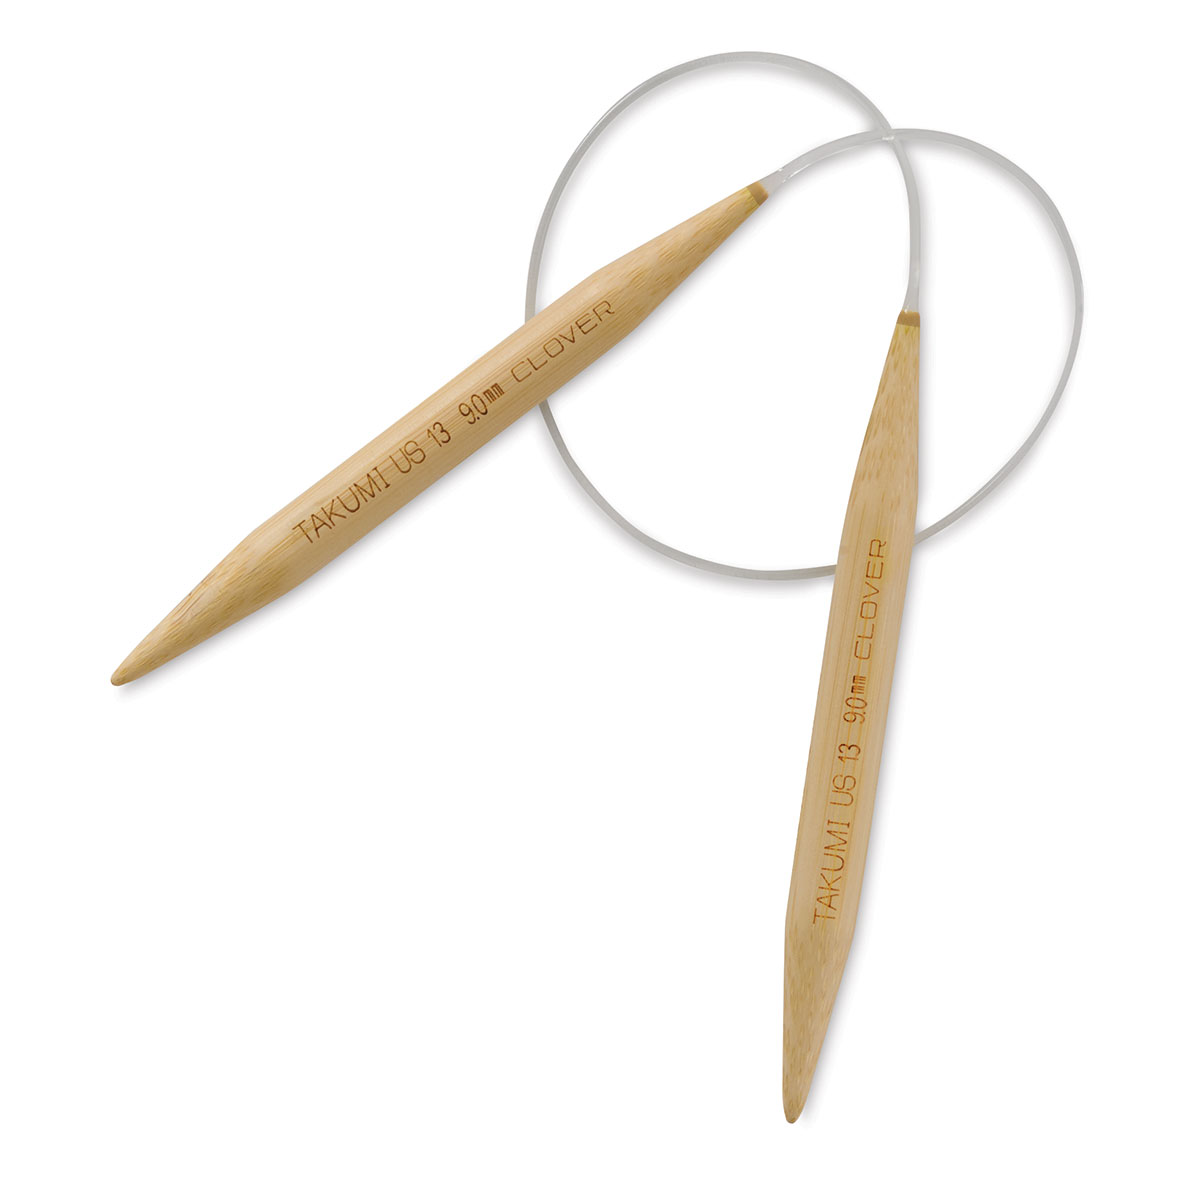 Clover PRO Takumi Bamboo Circular Needles 32 Inch - The Websters